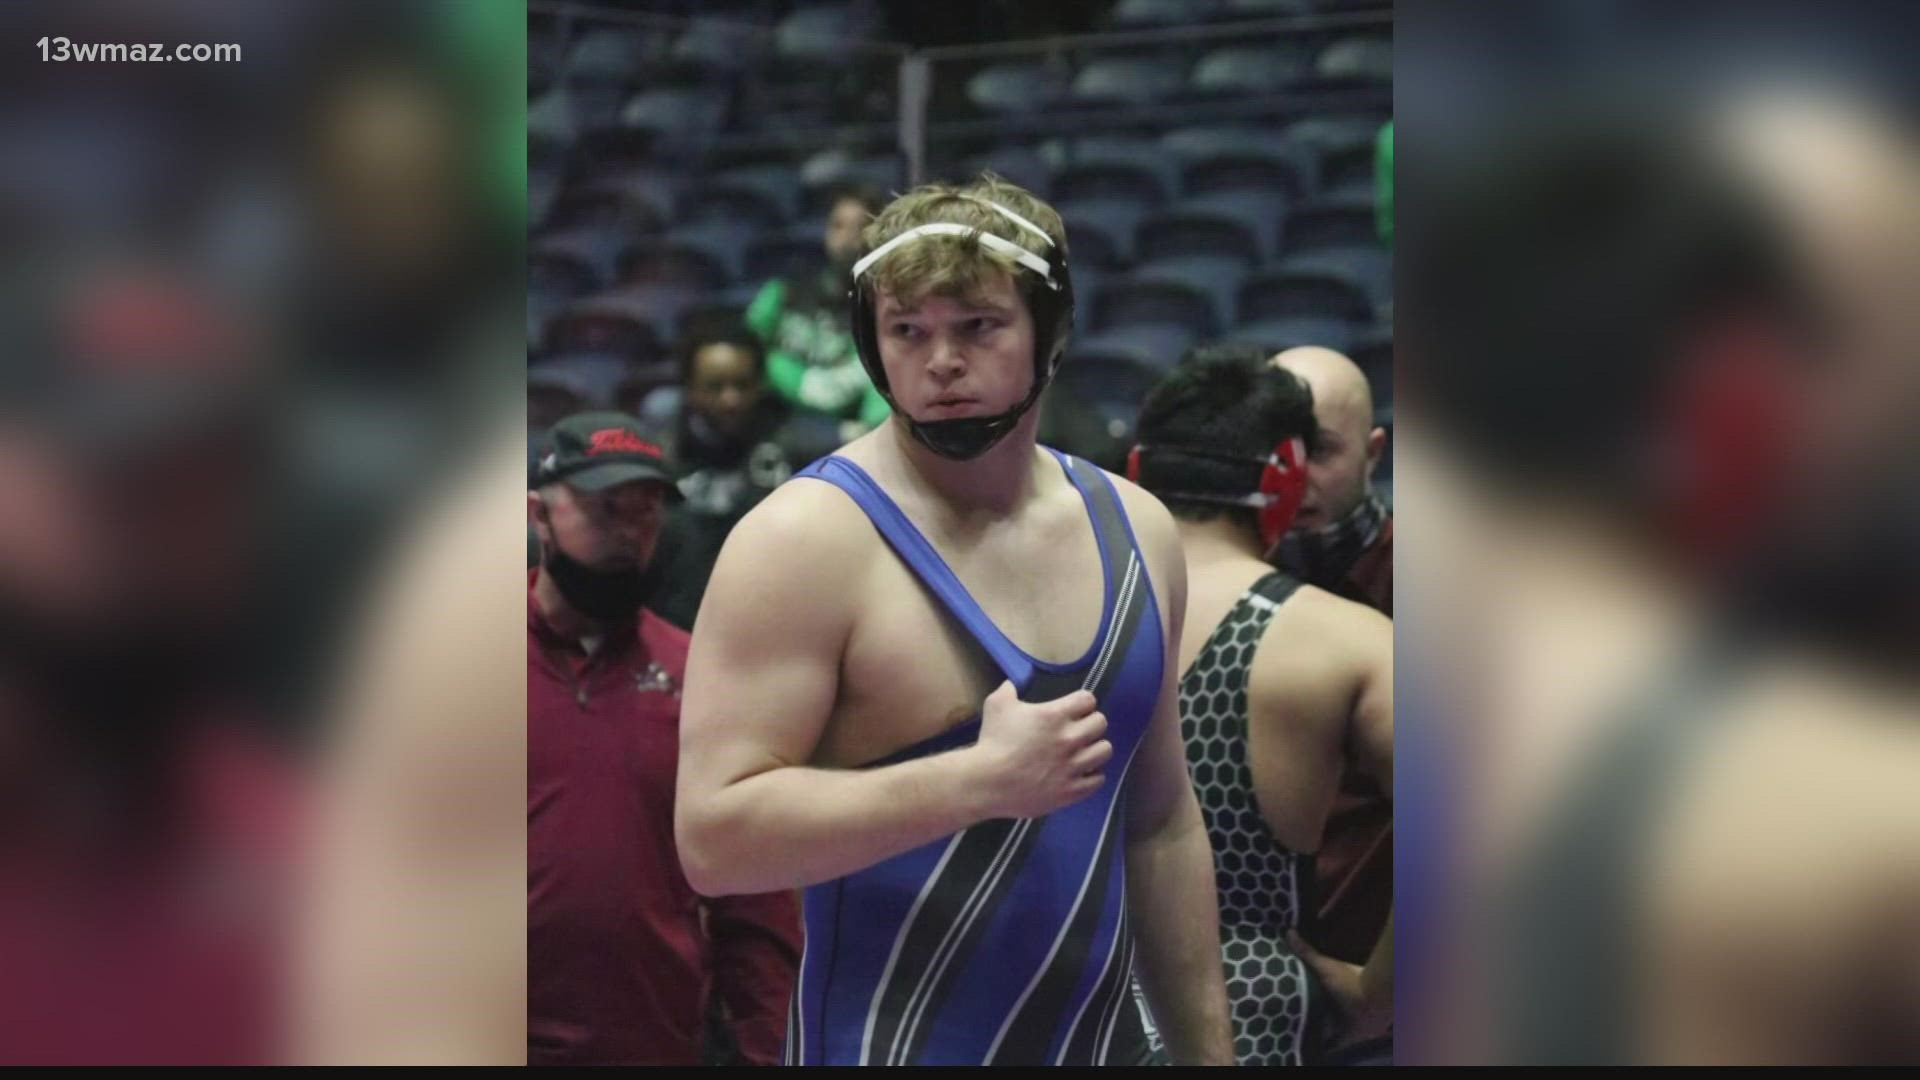 The West Laurens senior will look to cap off a record-breaking career with a fourth state title next week in Macon.